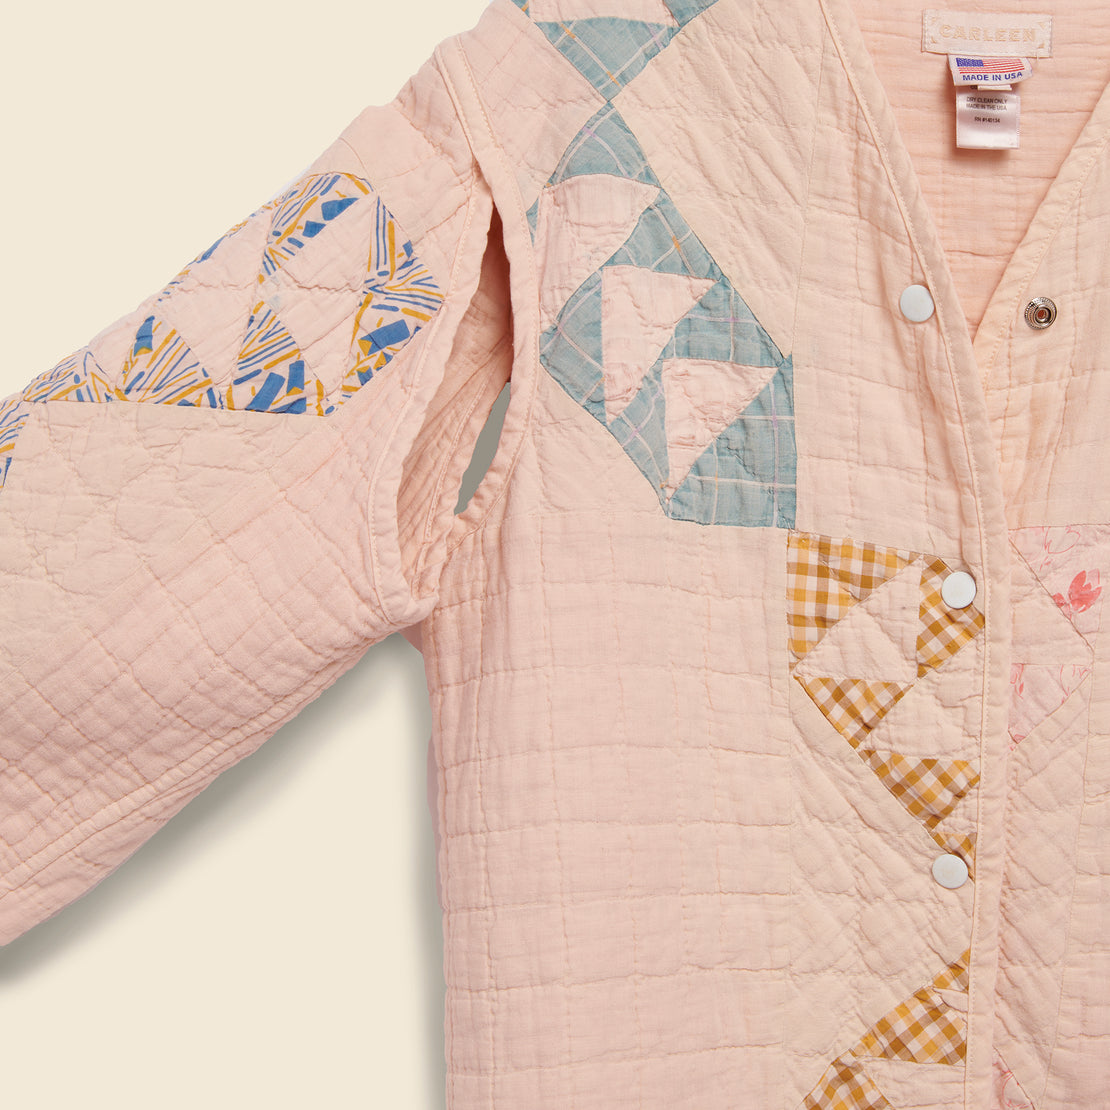 Quilt Liner Jacket - Pink Overdye, Small Triangles - Carleen - STAG Provisions - W - Outerwear - Coat/Jacket